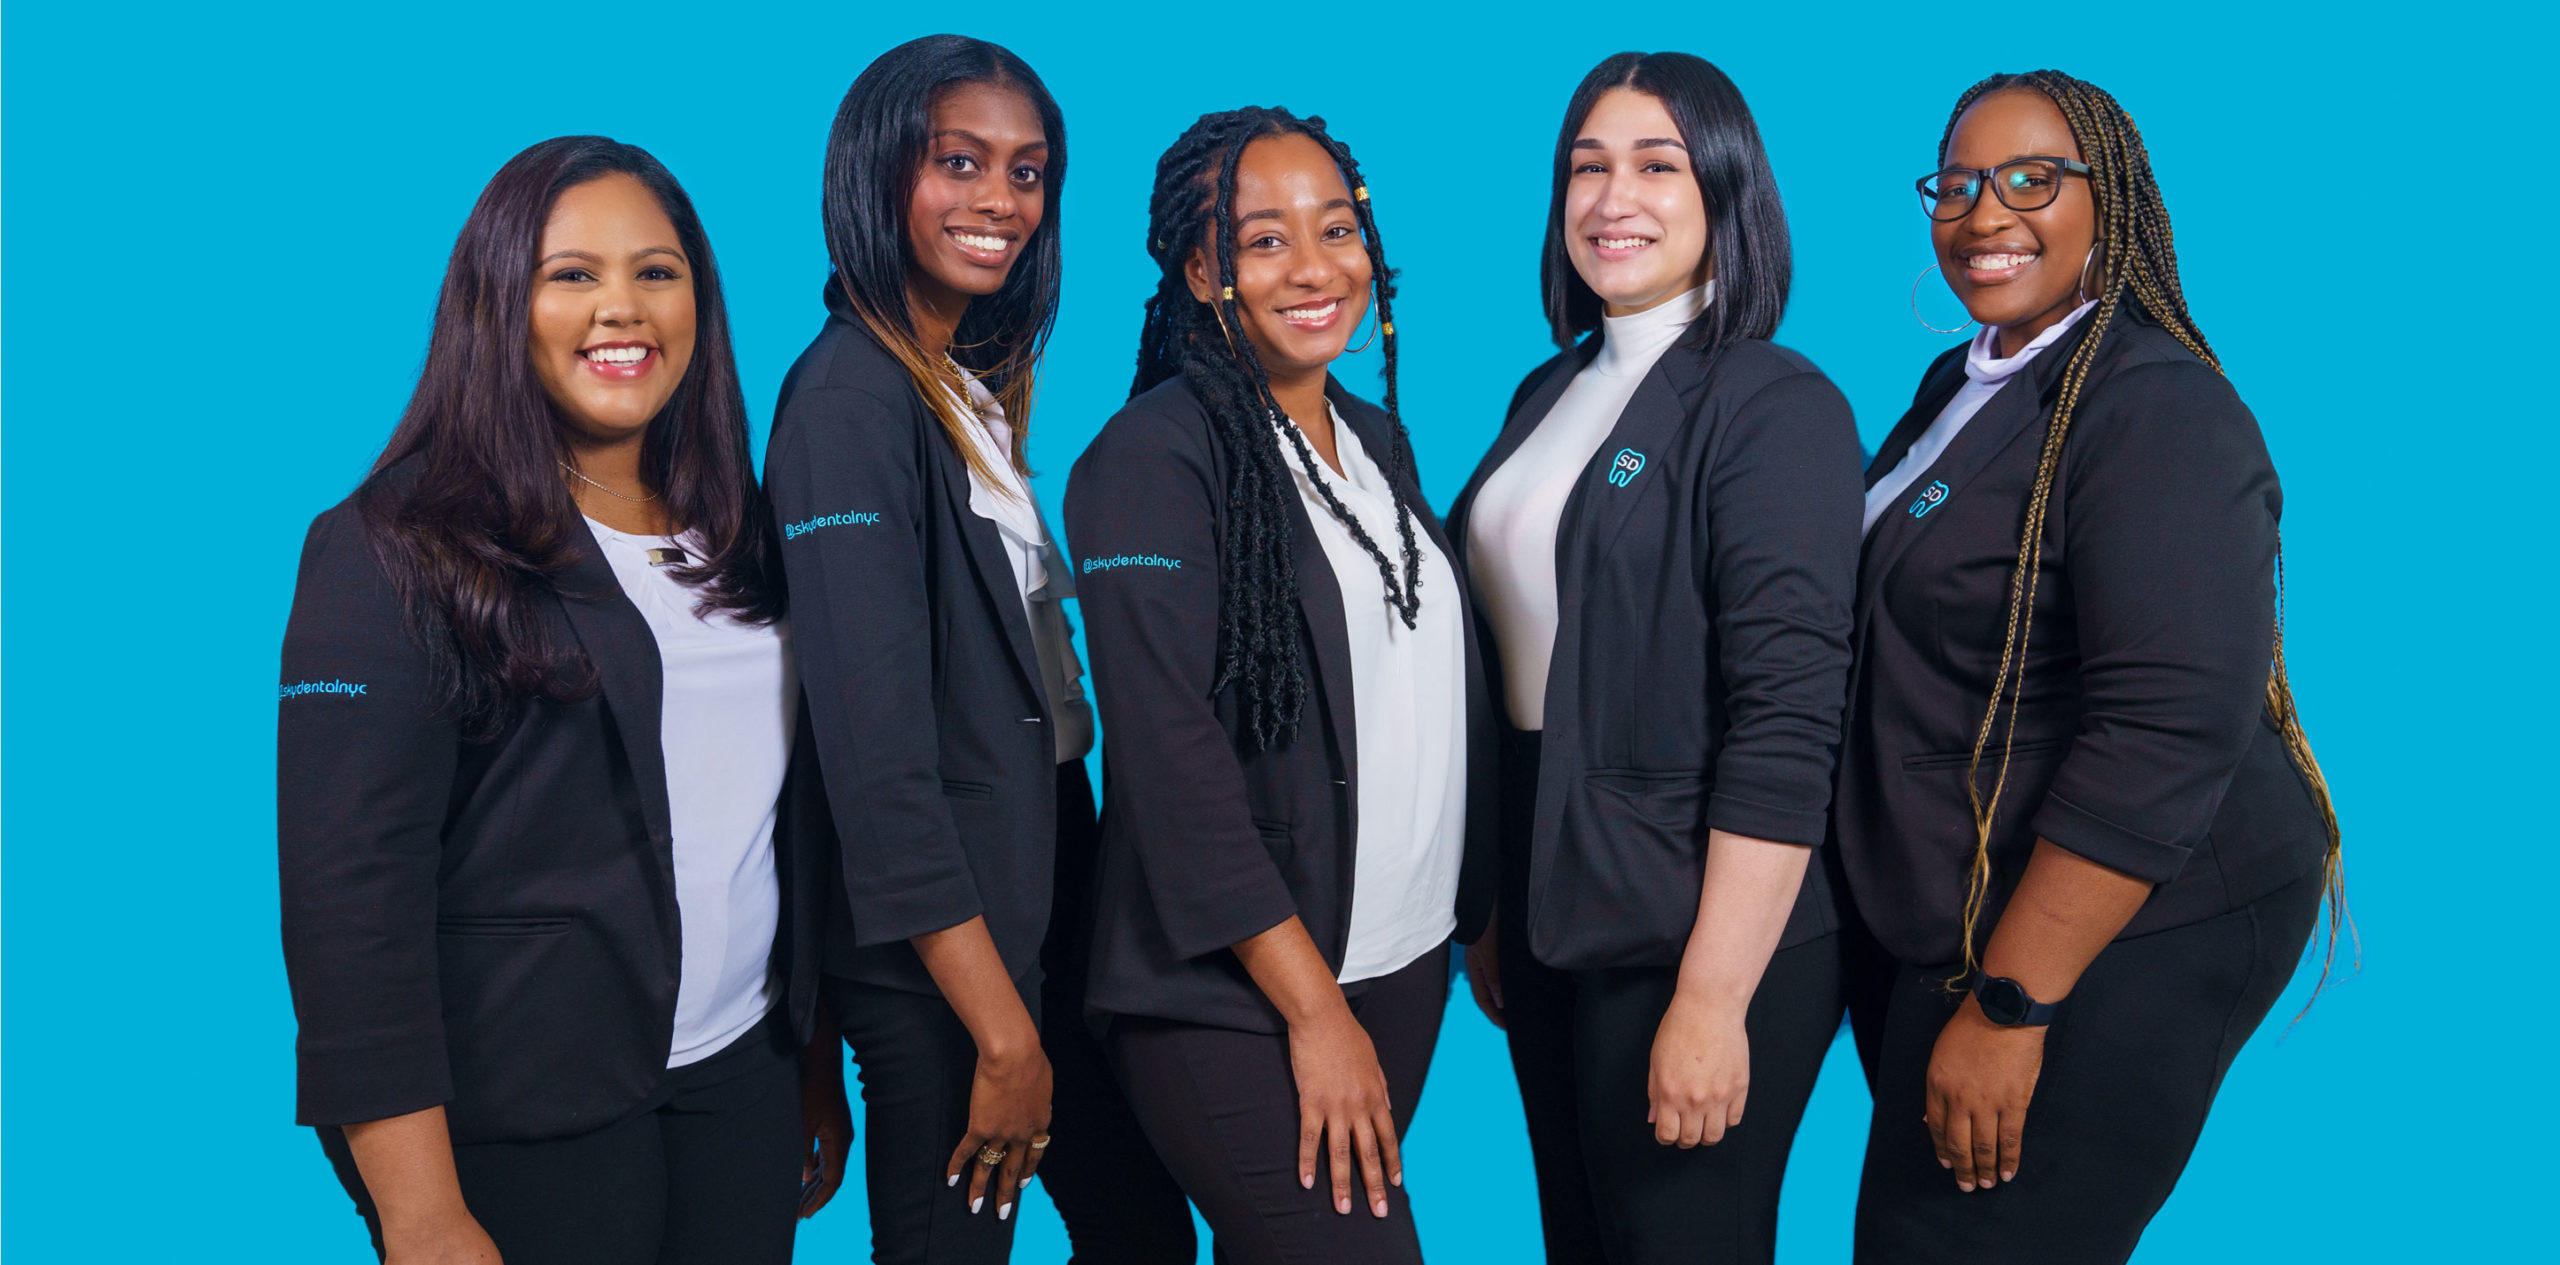 Sky Dental front desk team; a diverse group of five smiling women in white shirts and Sky Dental uniform jackets